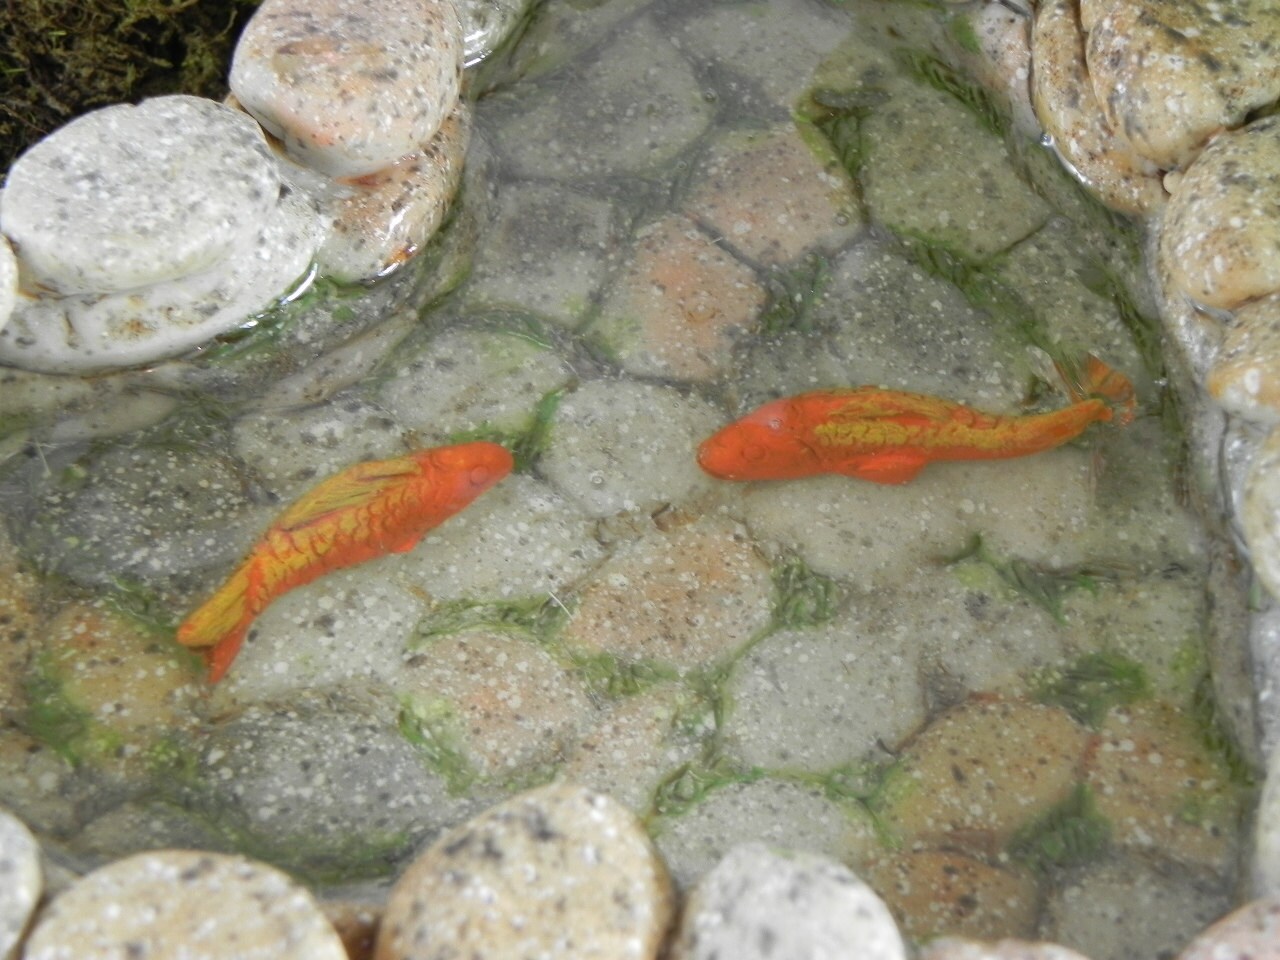 Koi Fish - Tancho Toy, Incredible Creatures